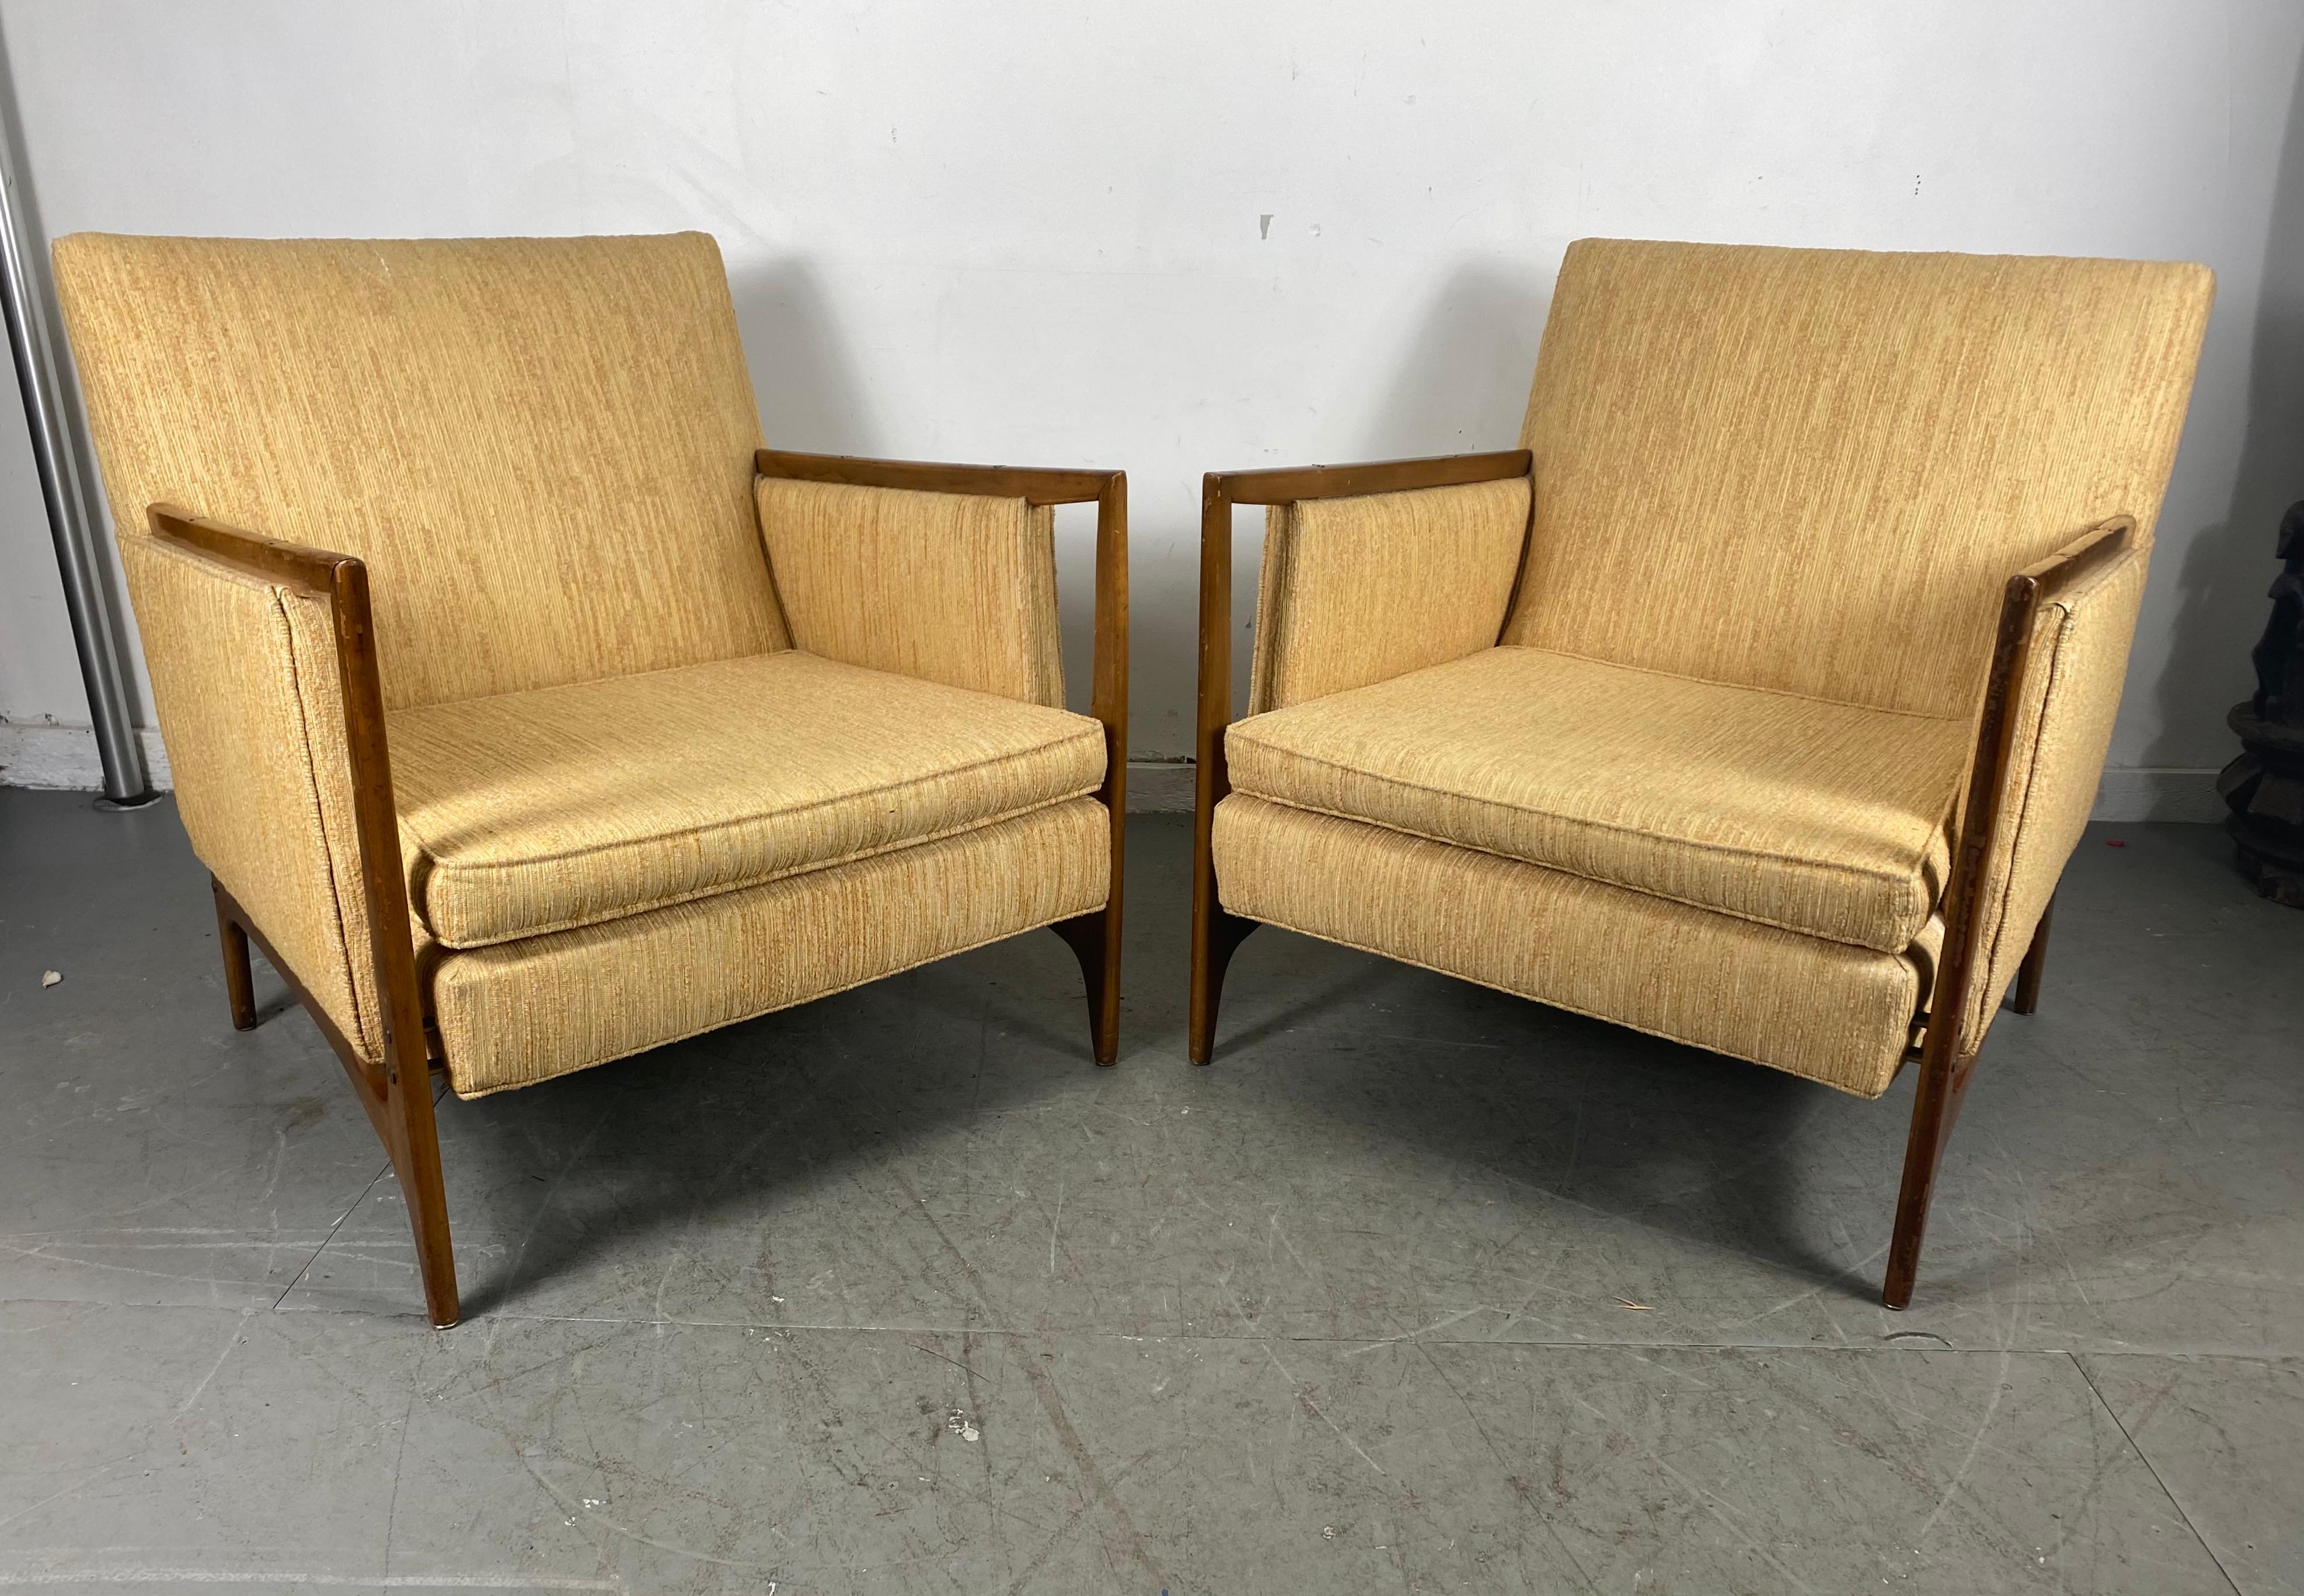 Scandinavian Modern Stunning Pair of Mid-Century Modernist Lounge Chairs Attributed to Dux of Sweden